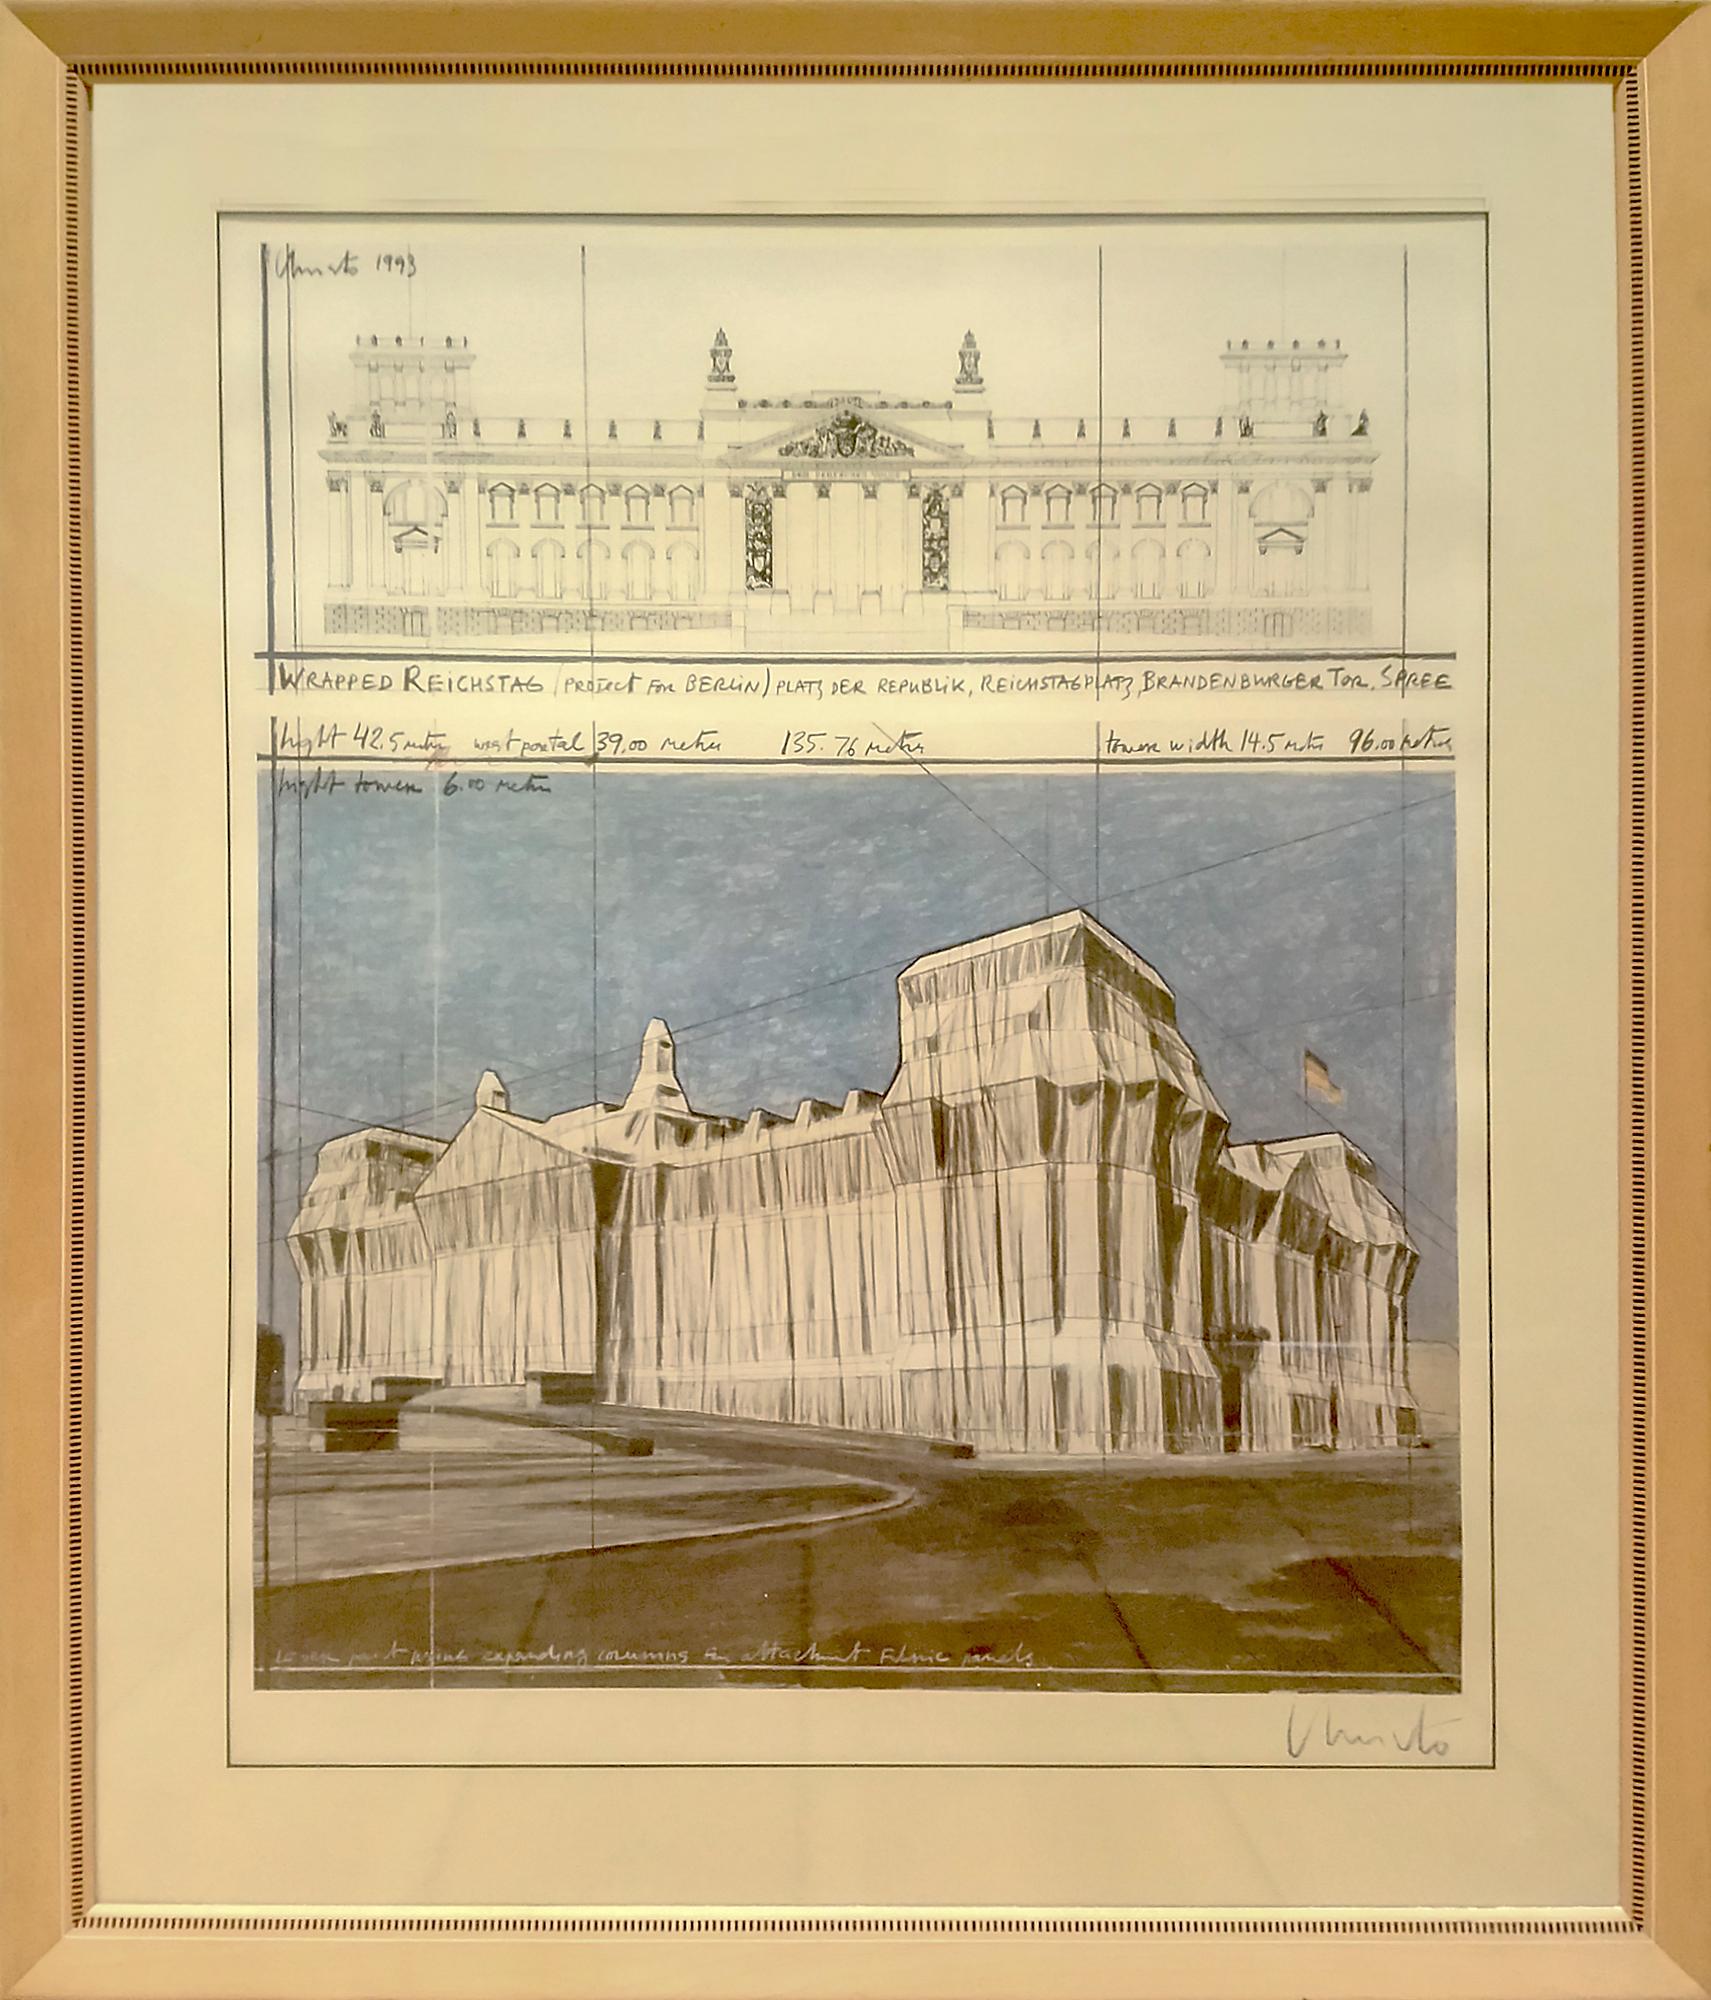 Christo and Jeanne-Claude Print - Wrapped Reichstag, Project for Berlin 1994-1995